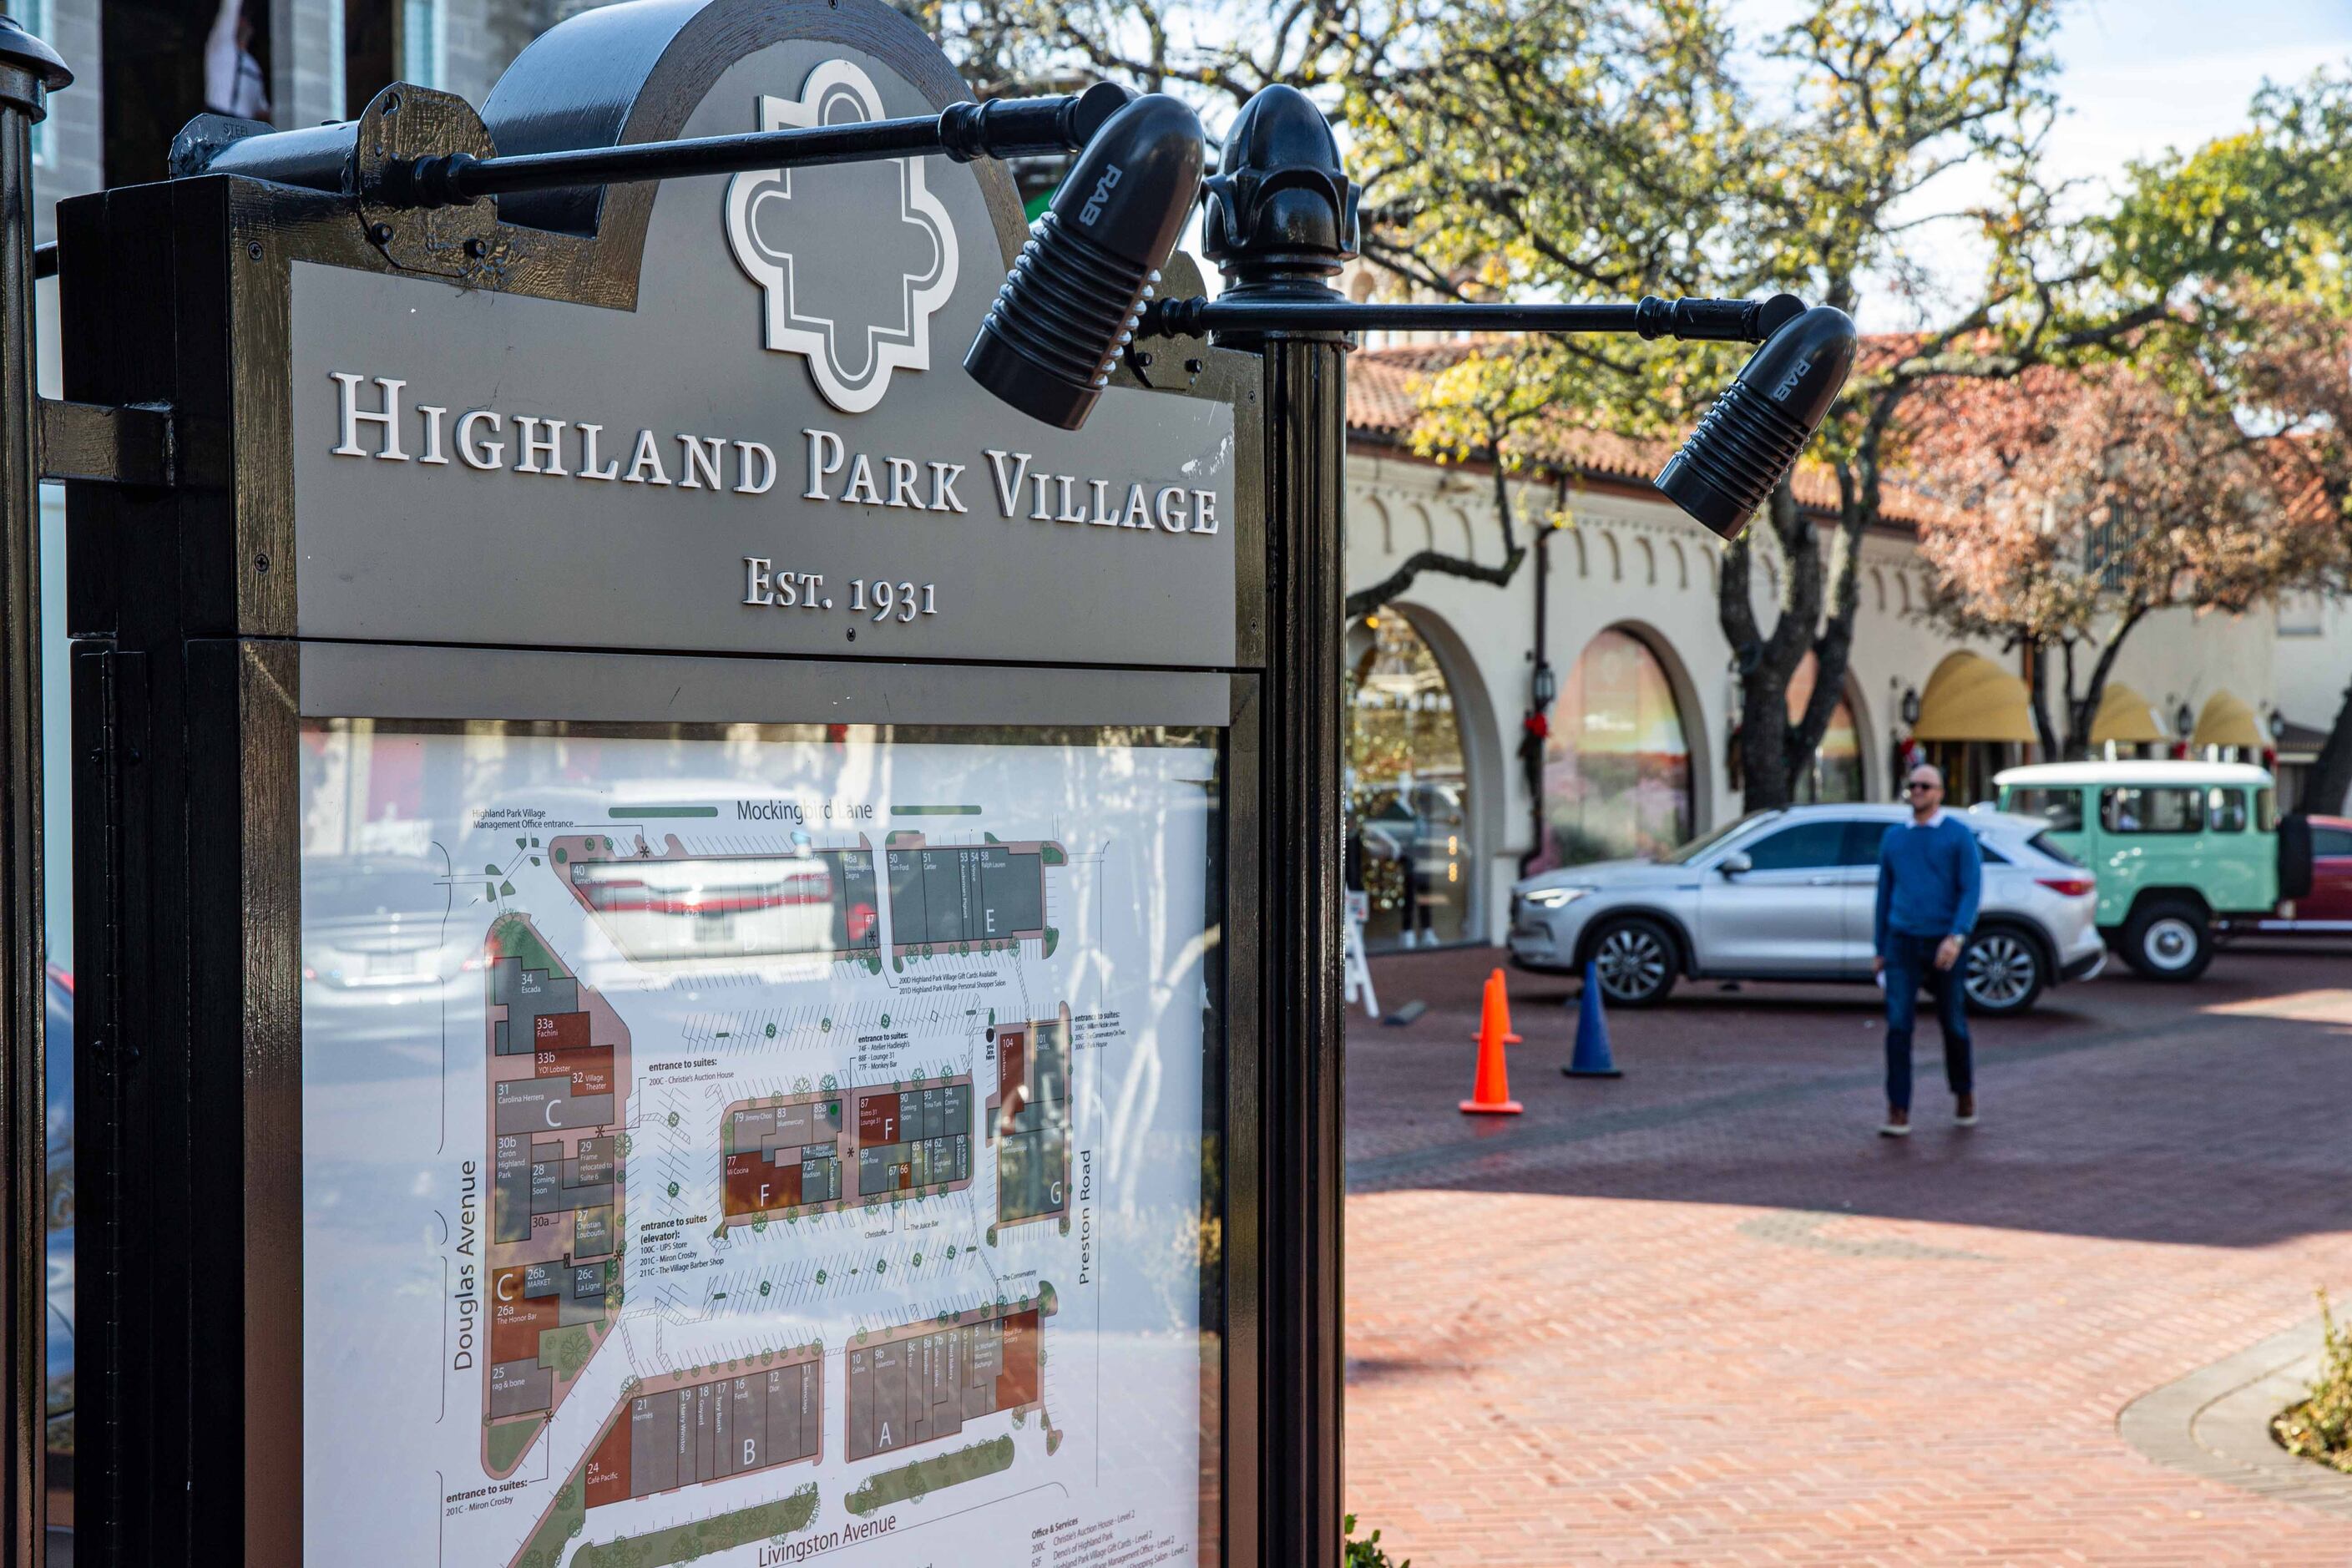 Dior takes rare two-level spot at Highland Park Village that Ralph